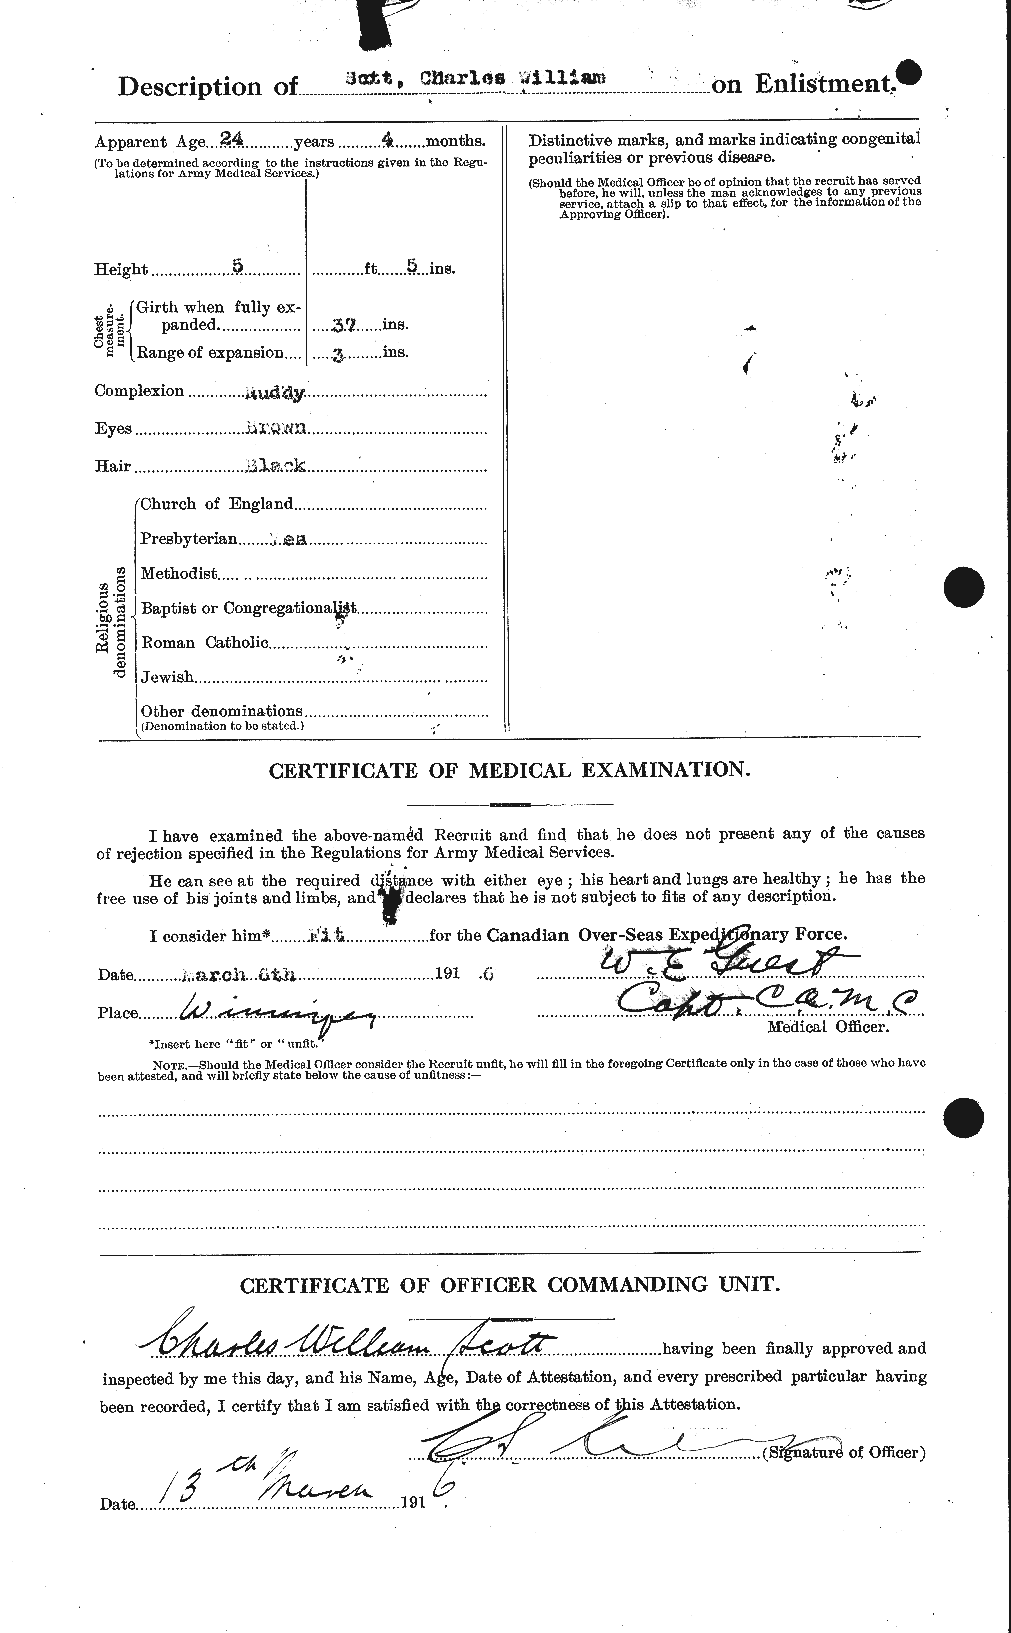 Personnel Records of the First World War - CEF 085869b